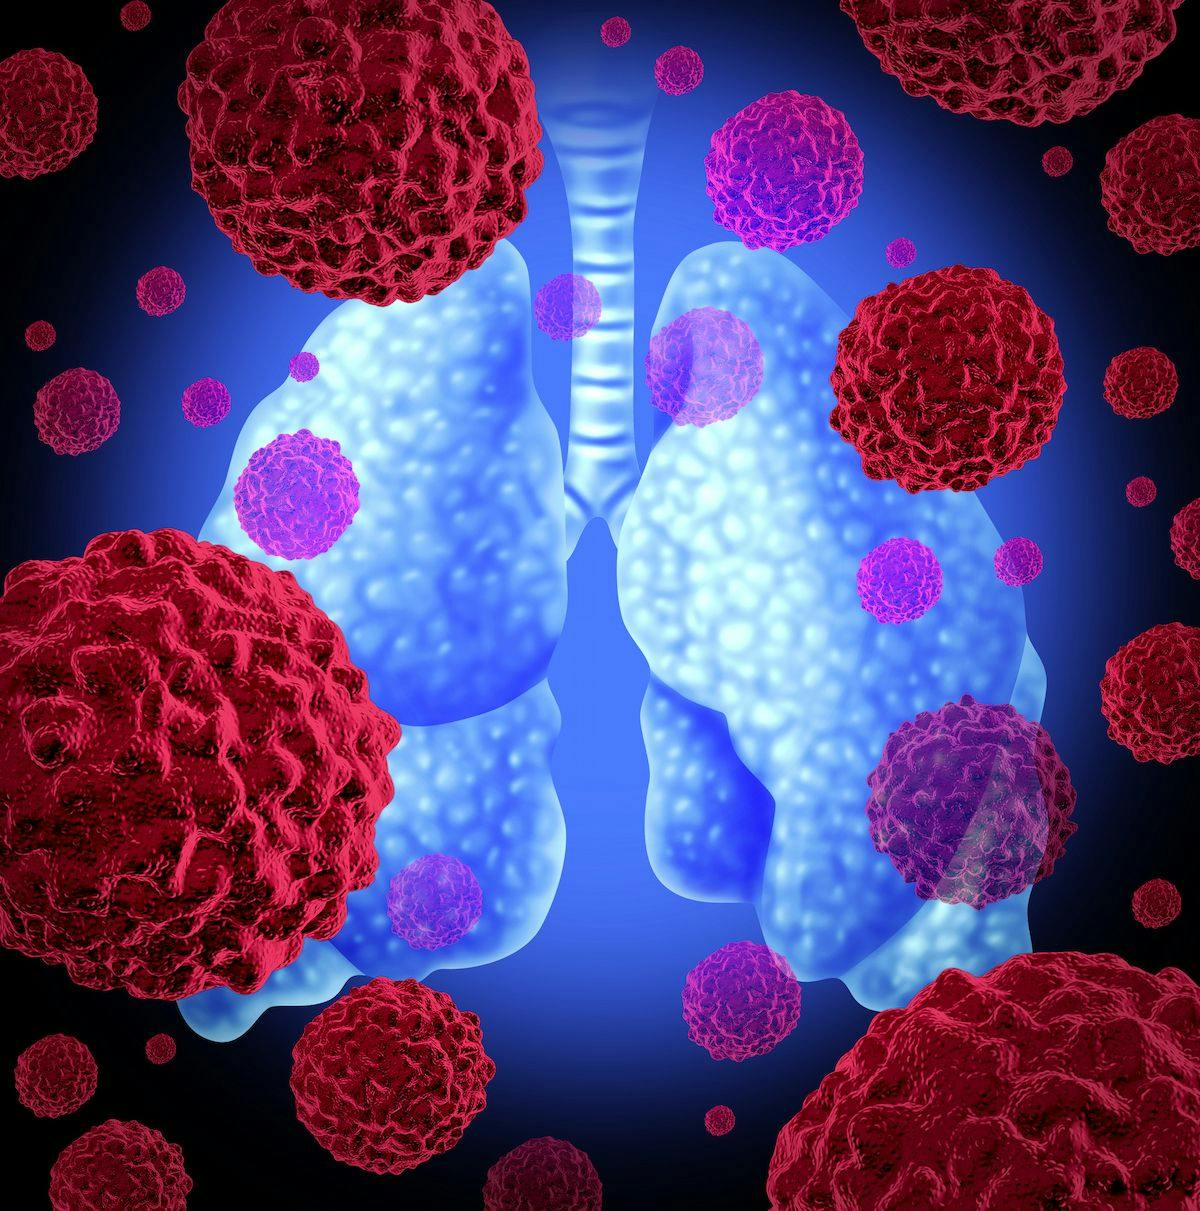 Patients 70 years or older with limited stage small cell lung cancer appear to tolerate concurrent thoracic chemoradiotherapy and have similar disease control rates as younger patients.